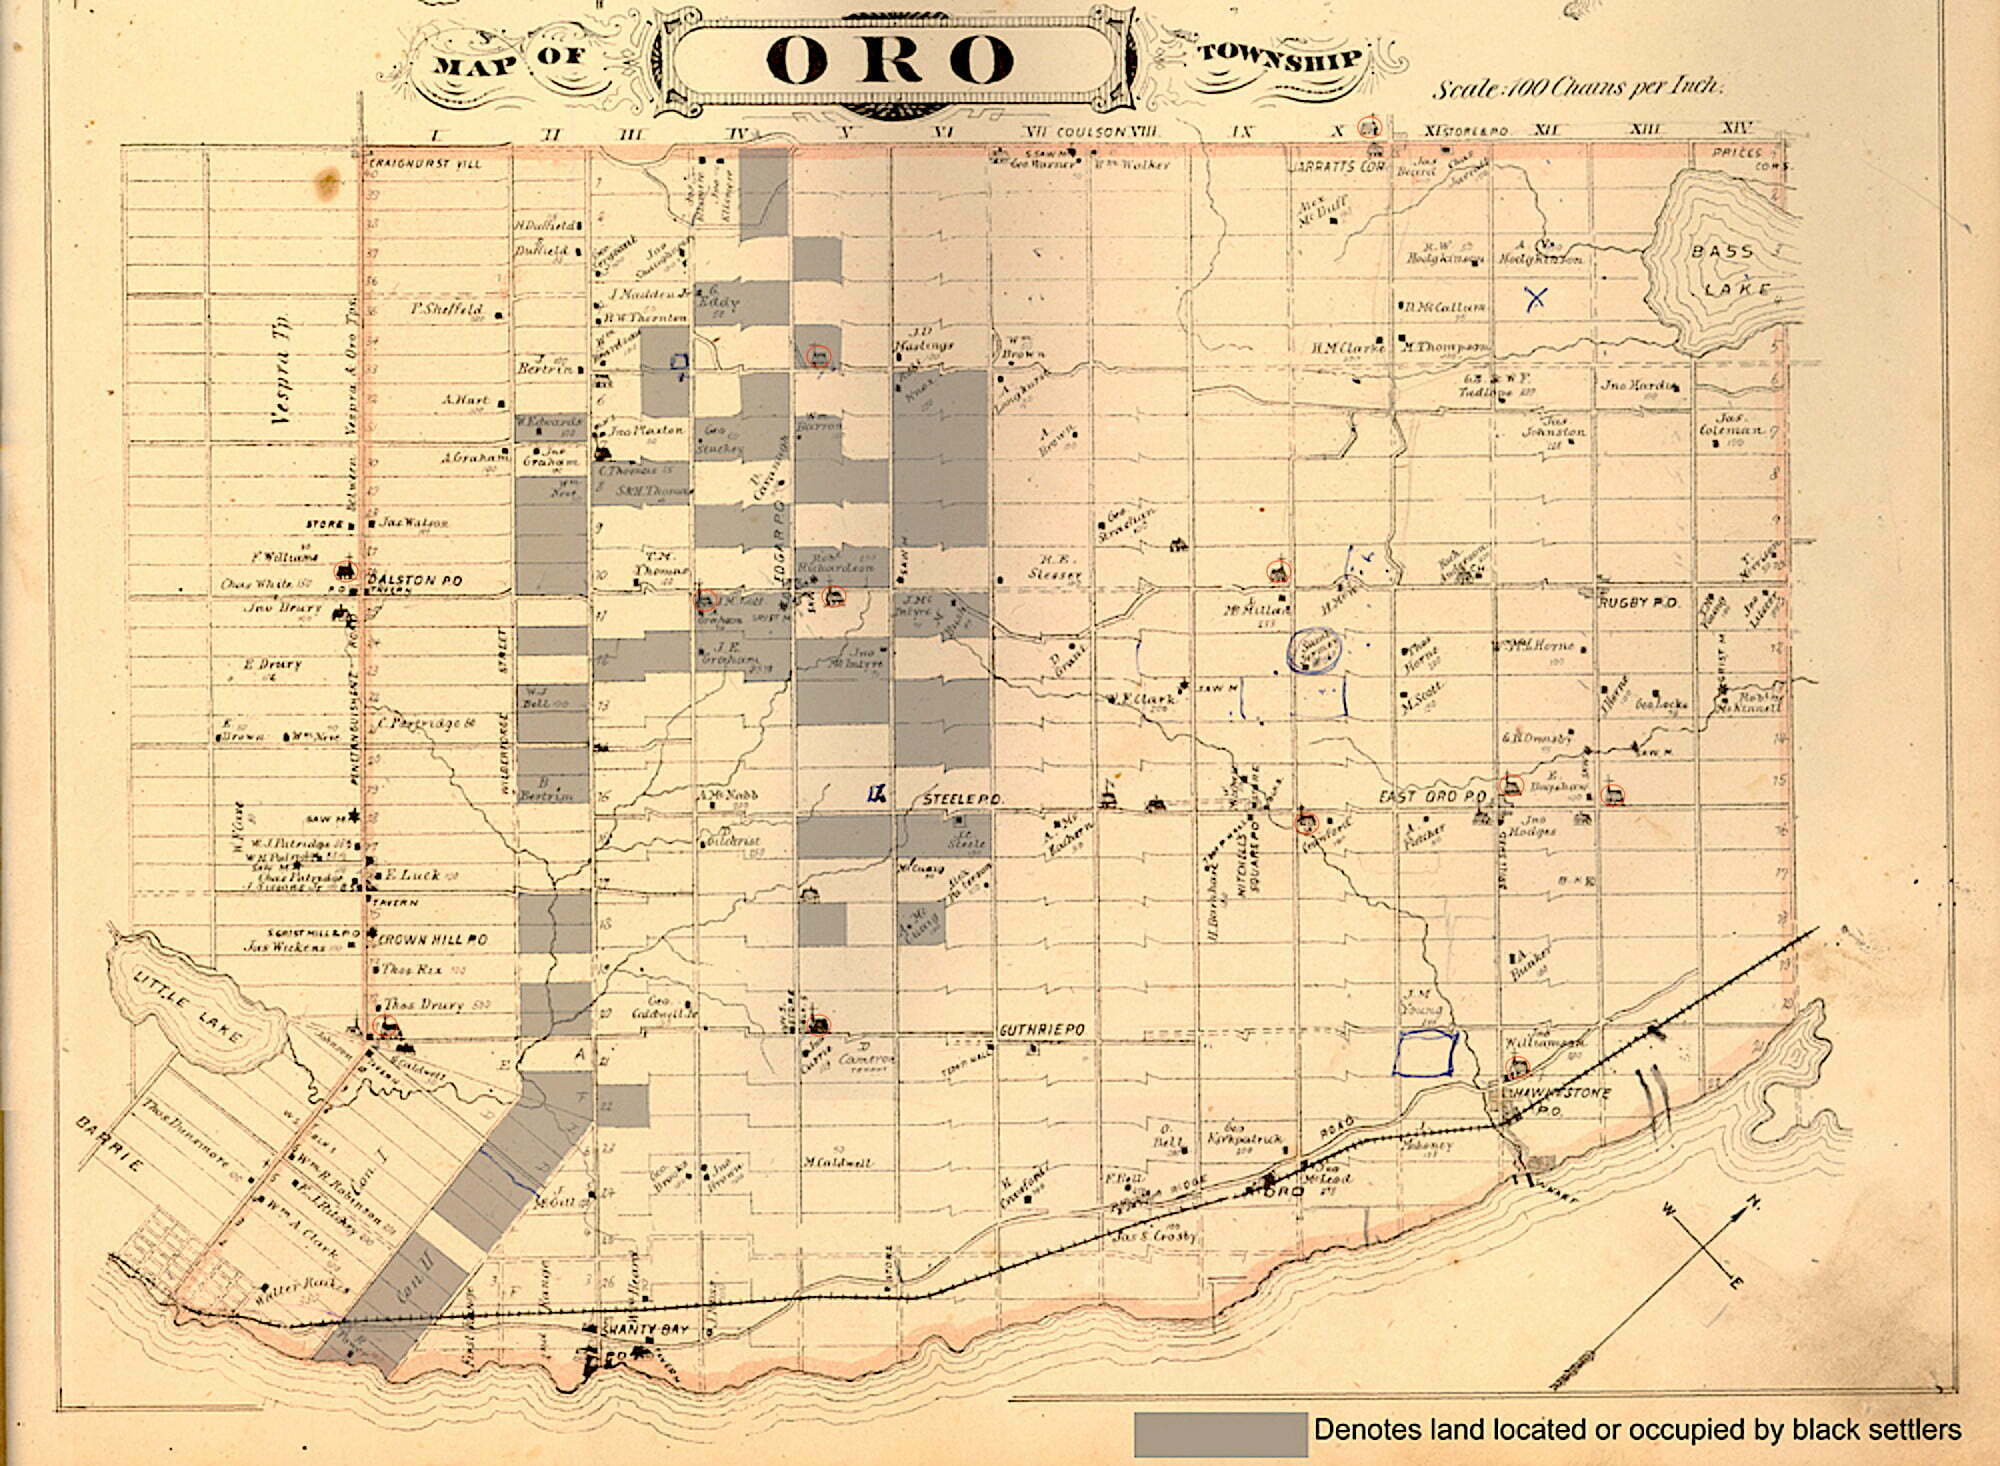 Oro Township showing lots located or occupied by black settlers.